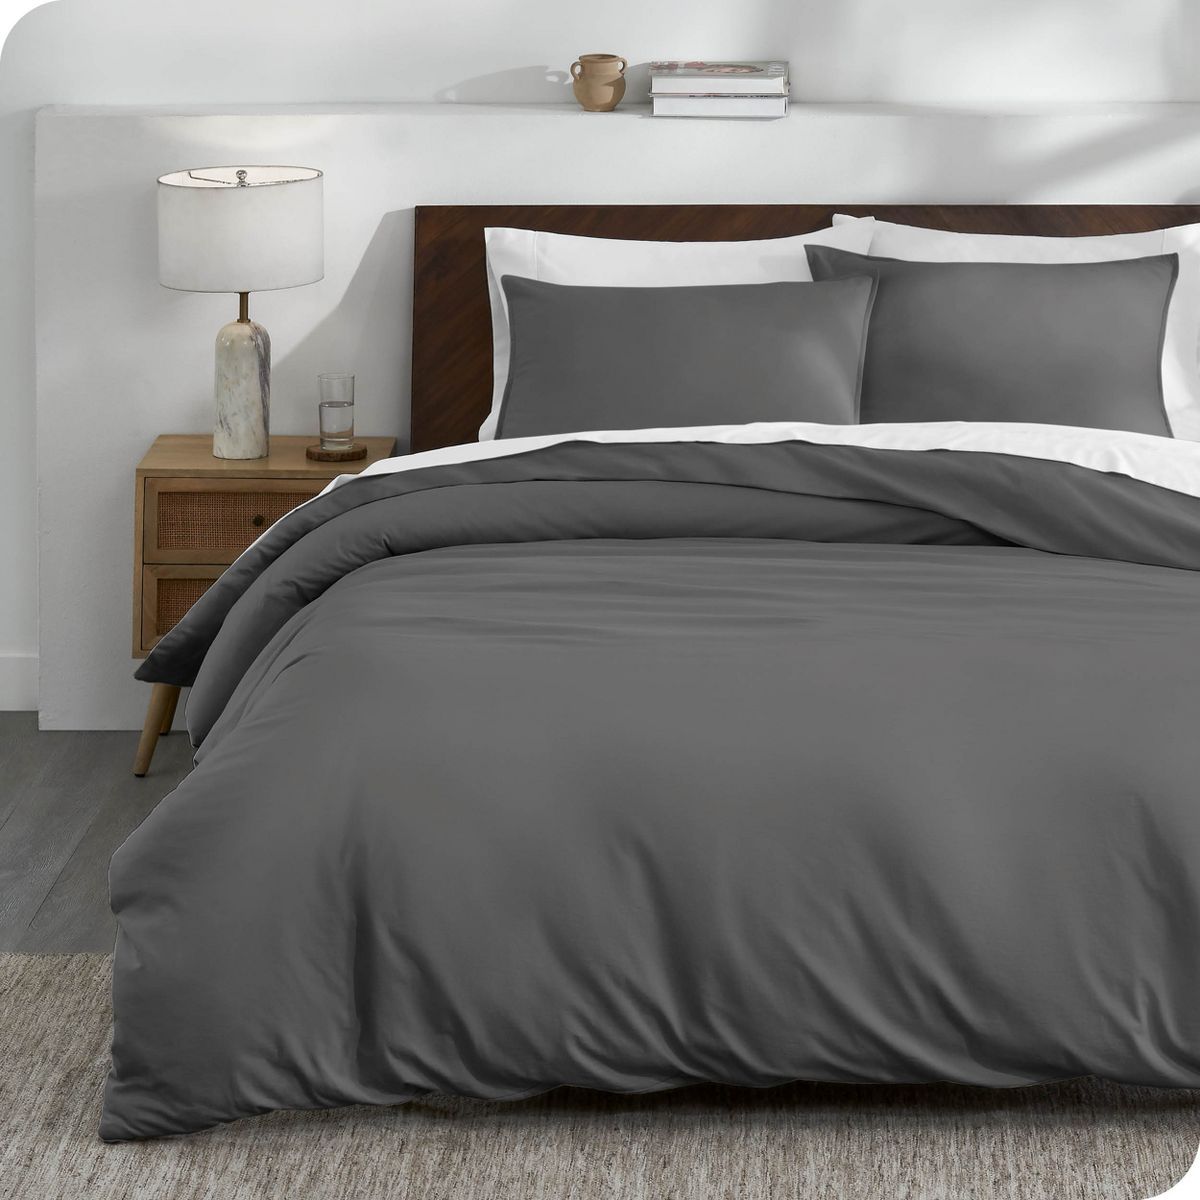 Organic Cotton Jersey Duvet Cover Set by Bare Home | Target